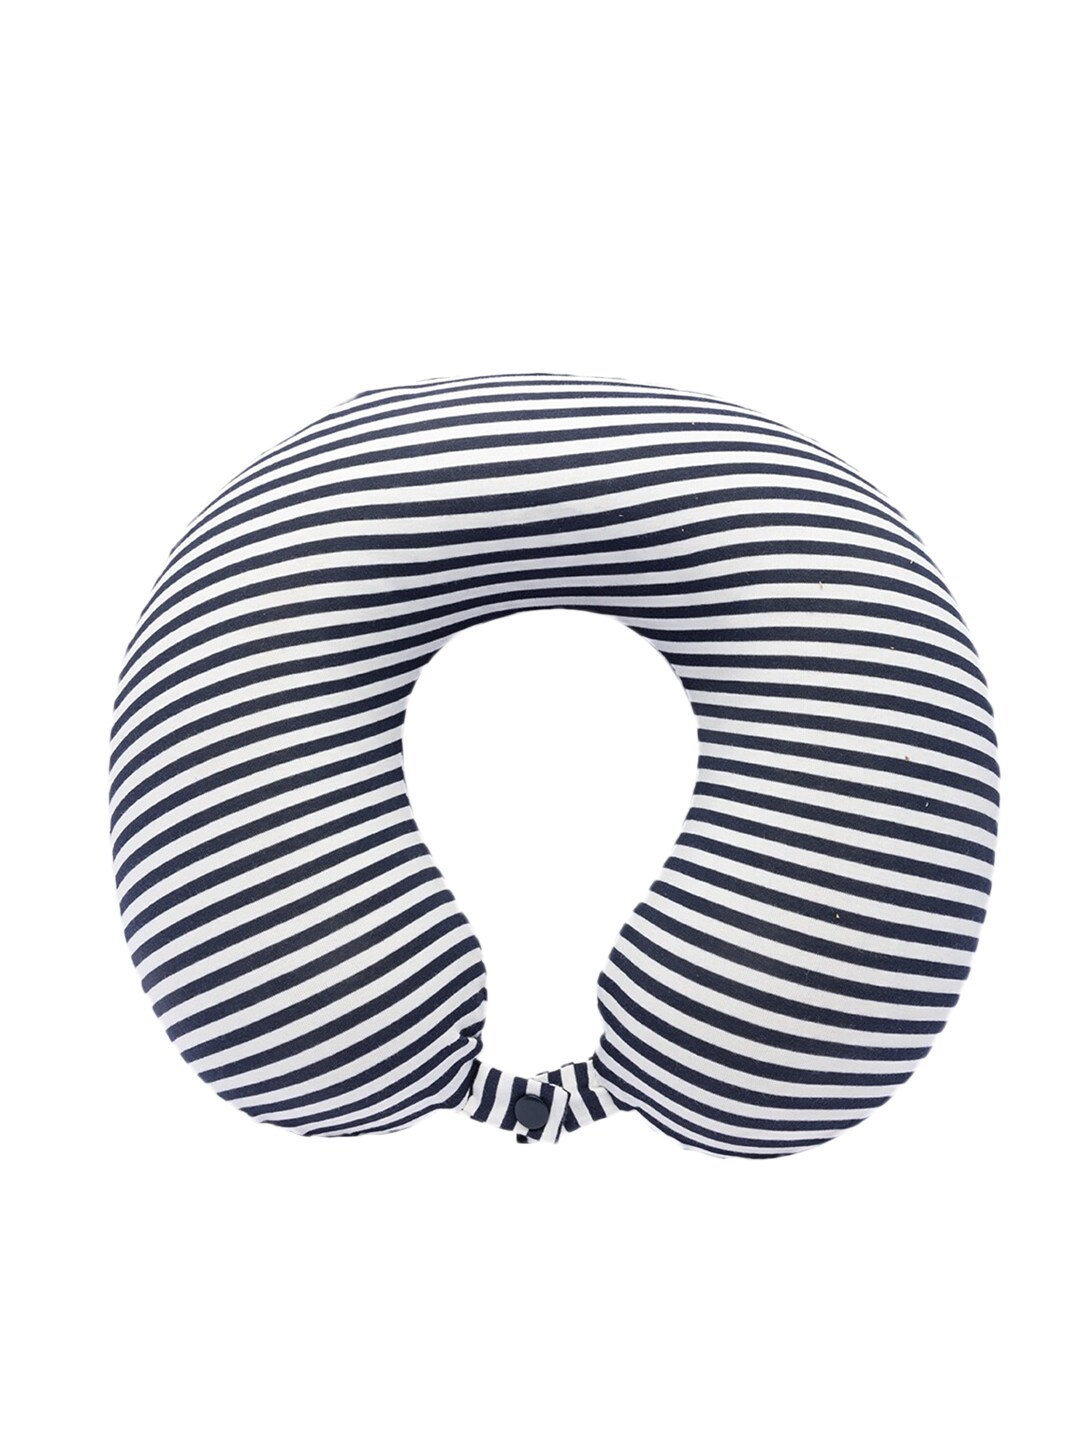 MARKET99 Blue & White Striped Neck Support Travel Pillow Price in India